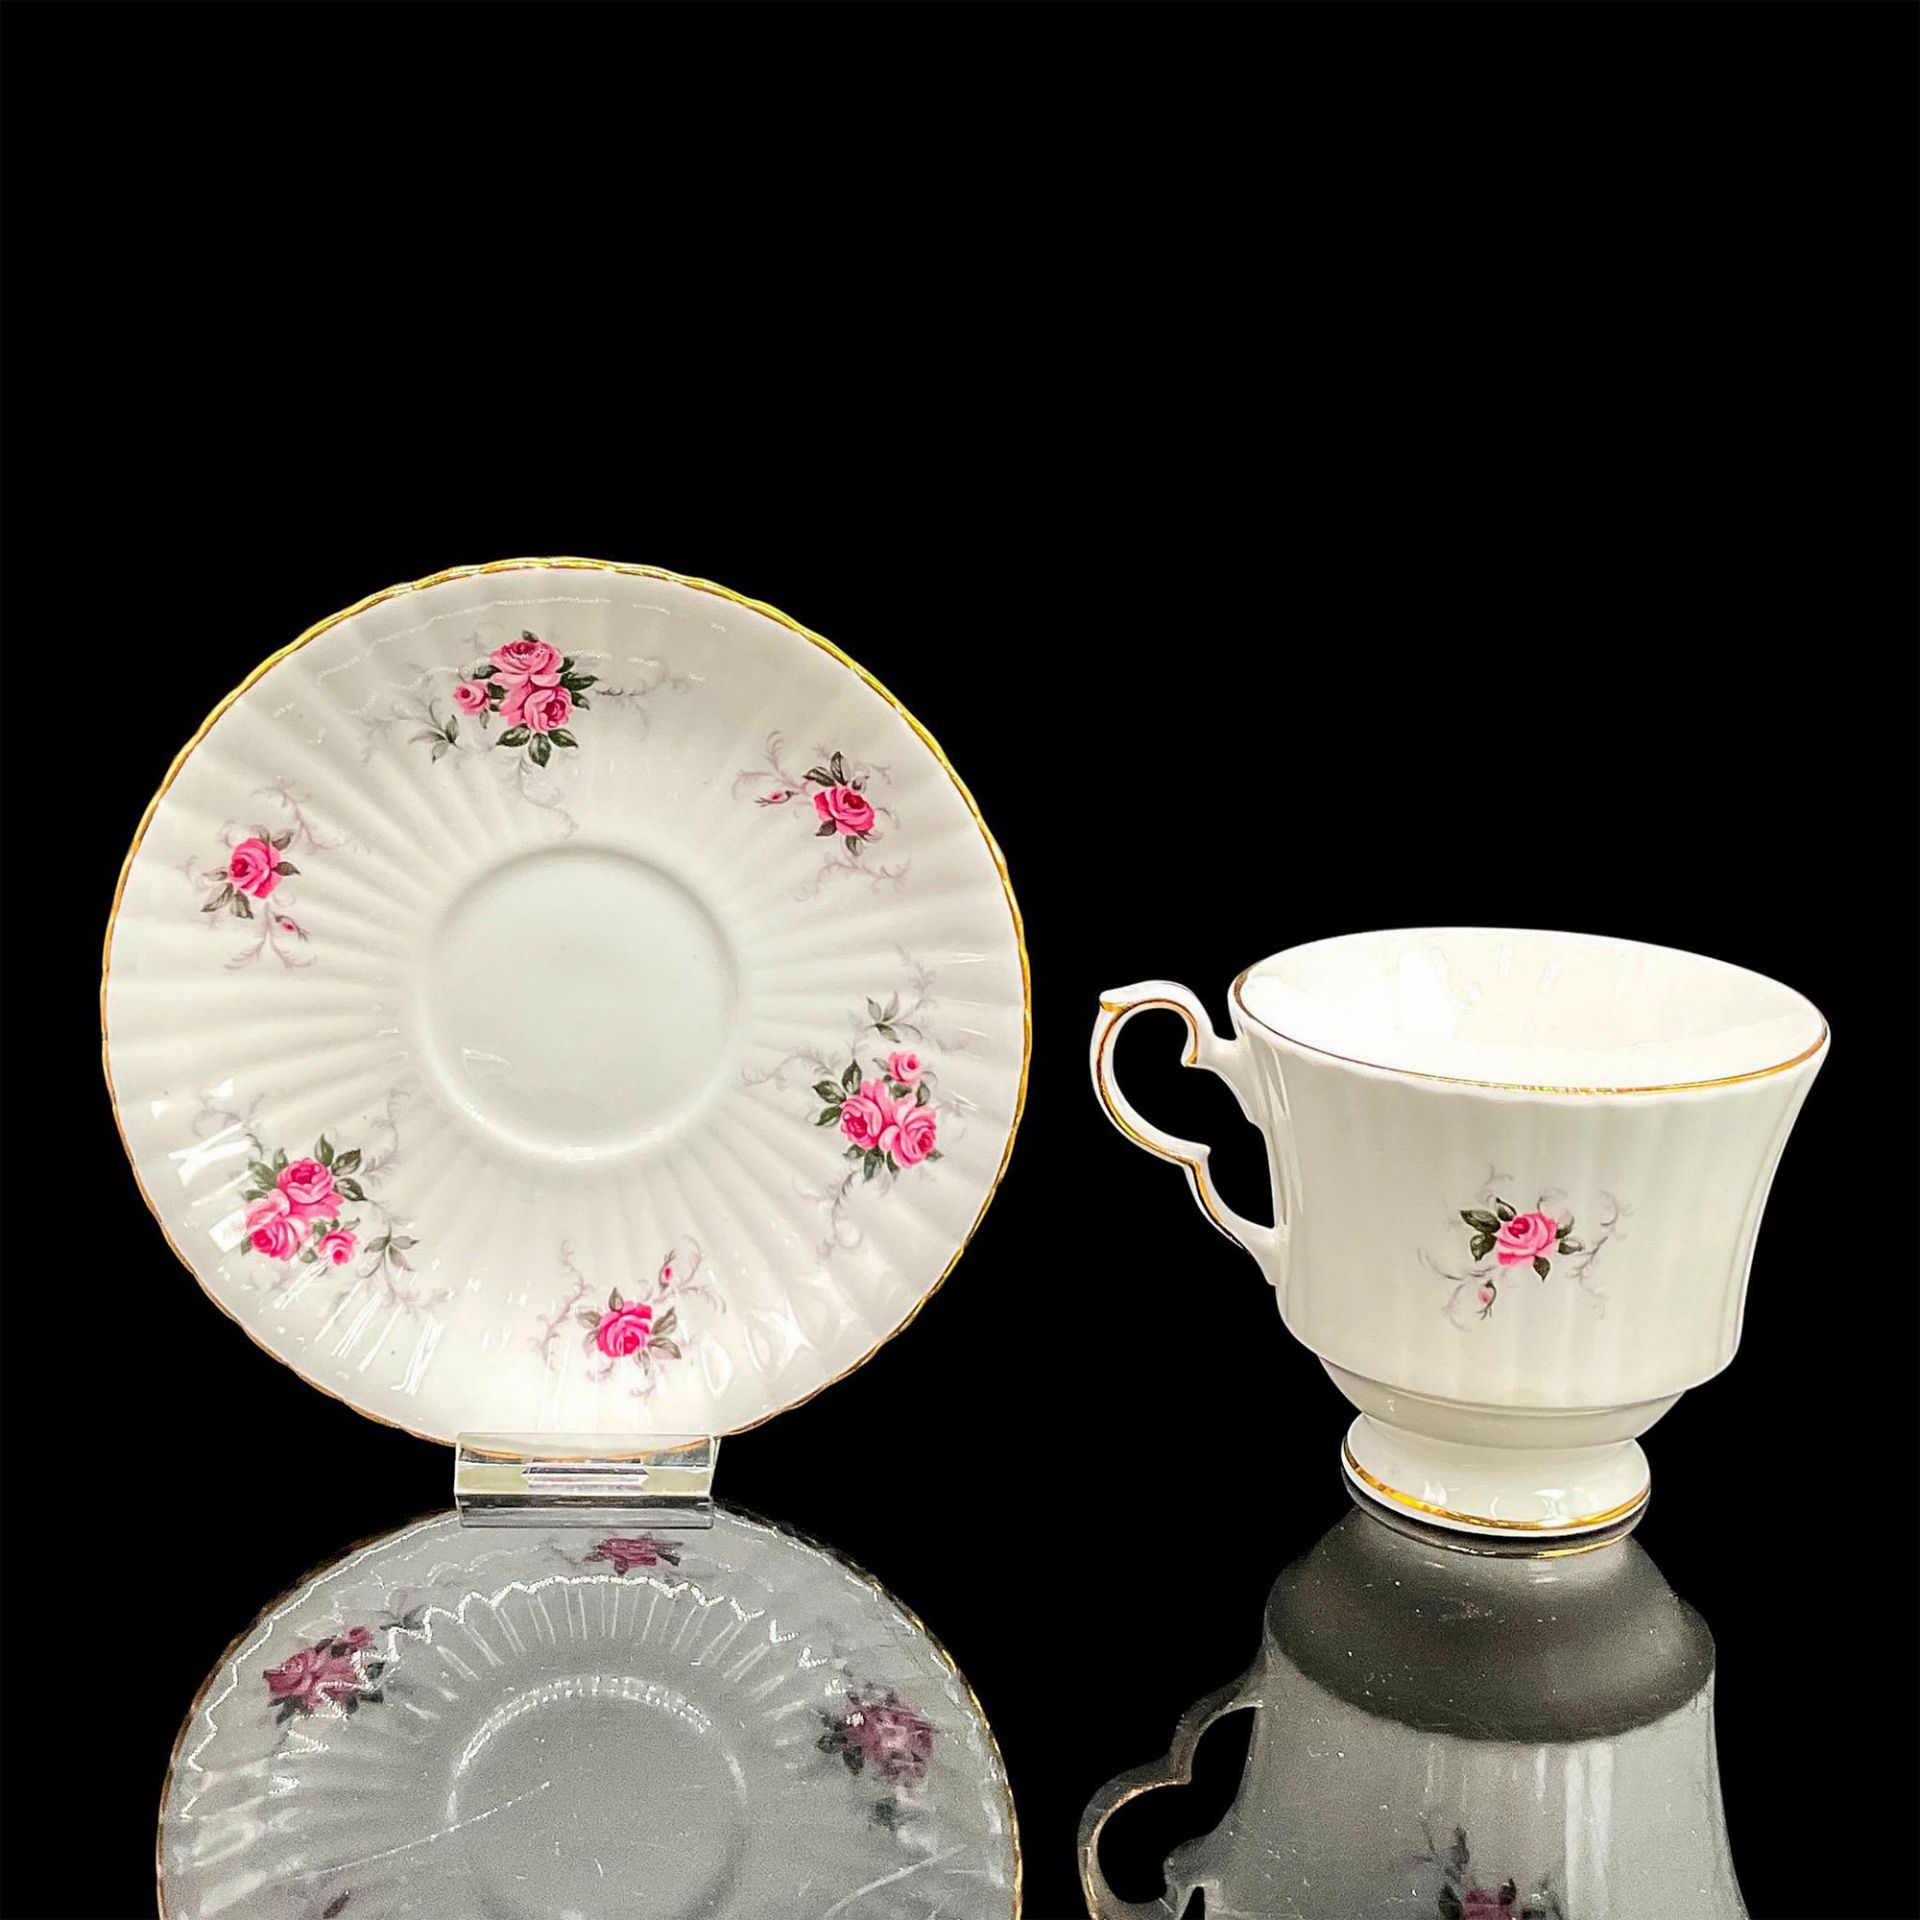 2pc Hammersley Cup + Saucer, Princess House, Windsor Rose - Image 2 of 3